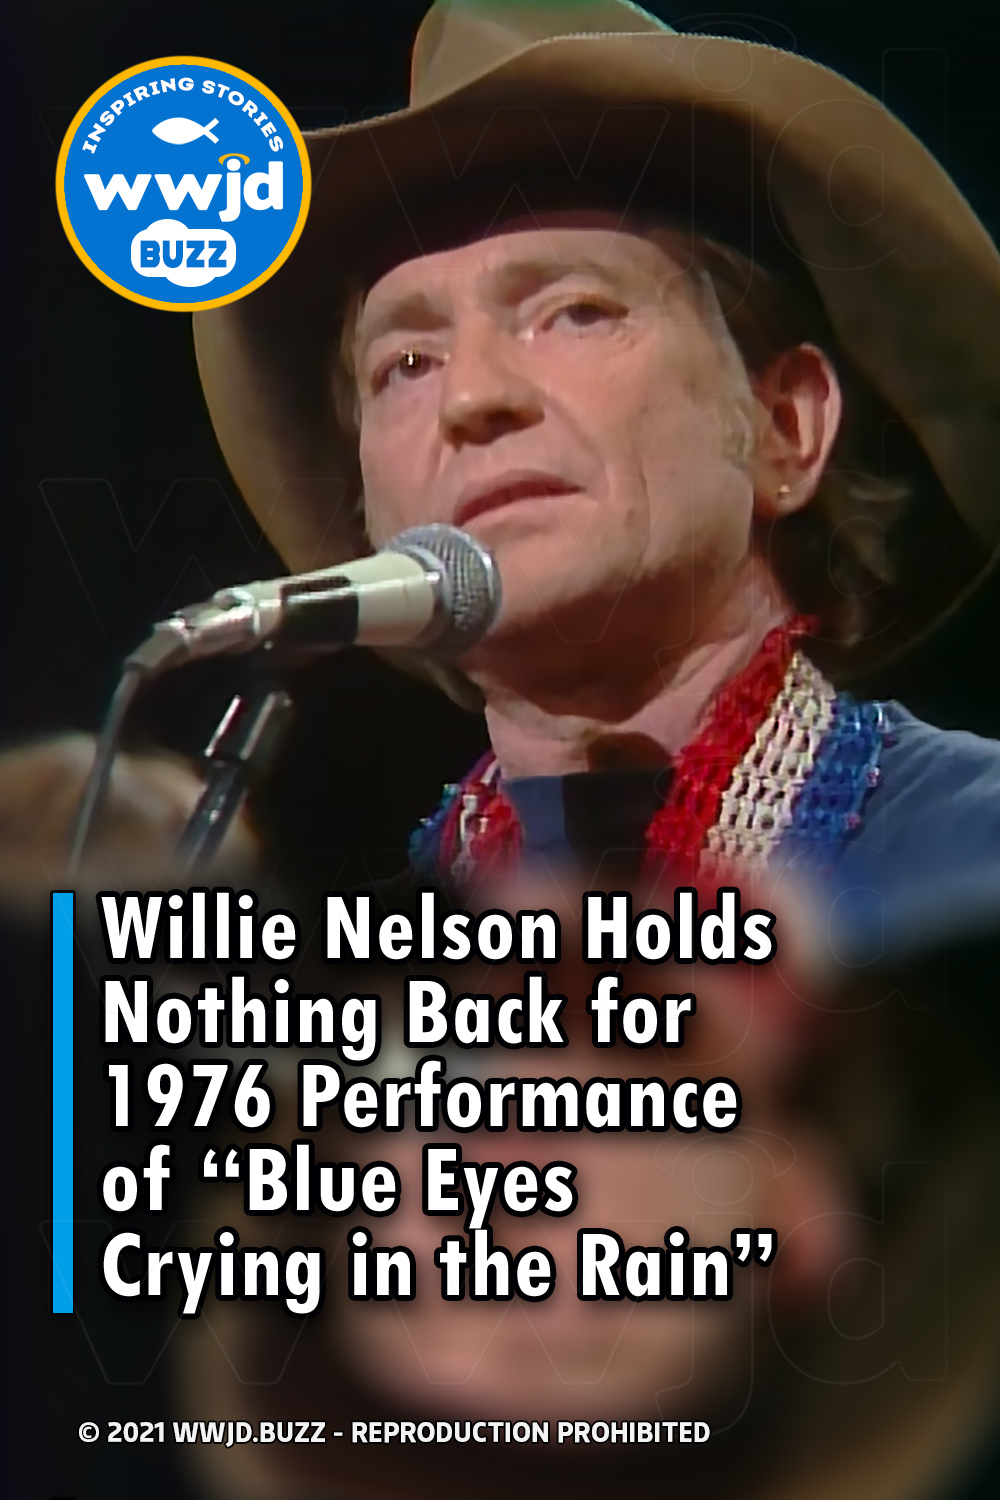 Willie Nelson Holds Nothing Back for 1976 Performance of “Blue Eyes Crying in the Rain”